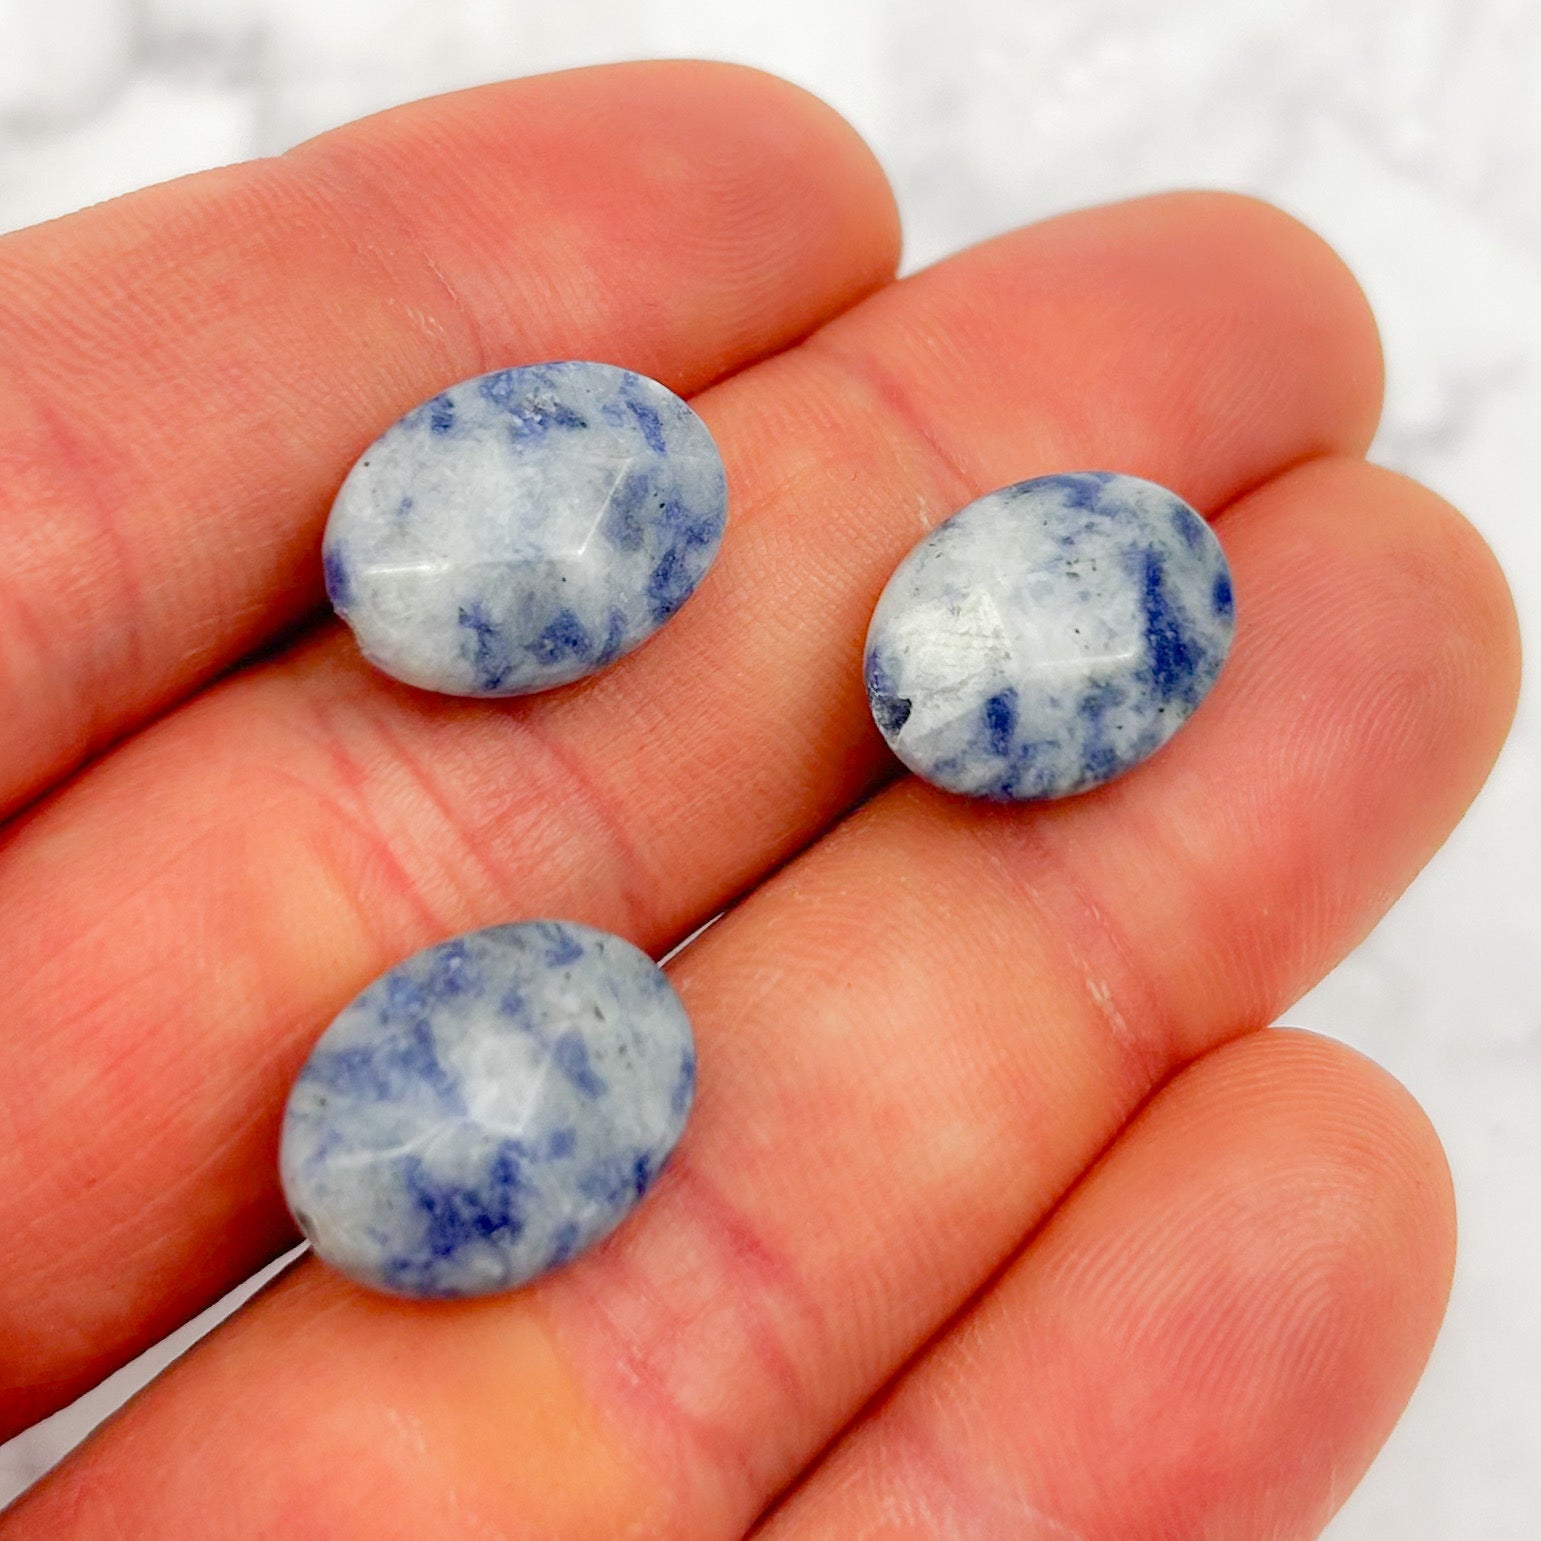 17mm Blue Jasper Faceted Oval Focal Bead Pack (3 Beads)